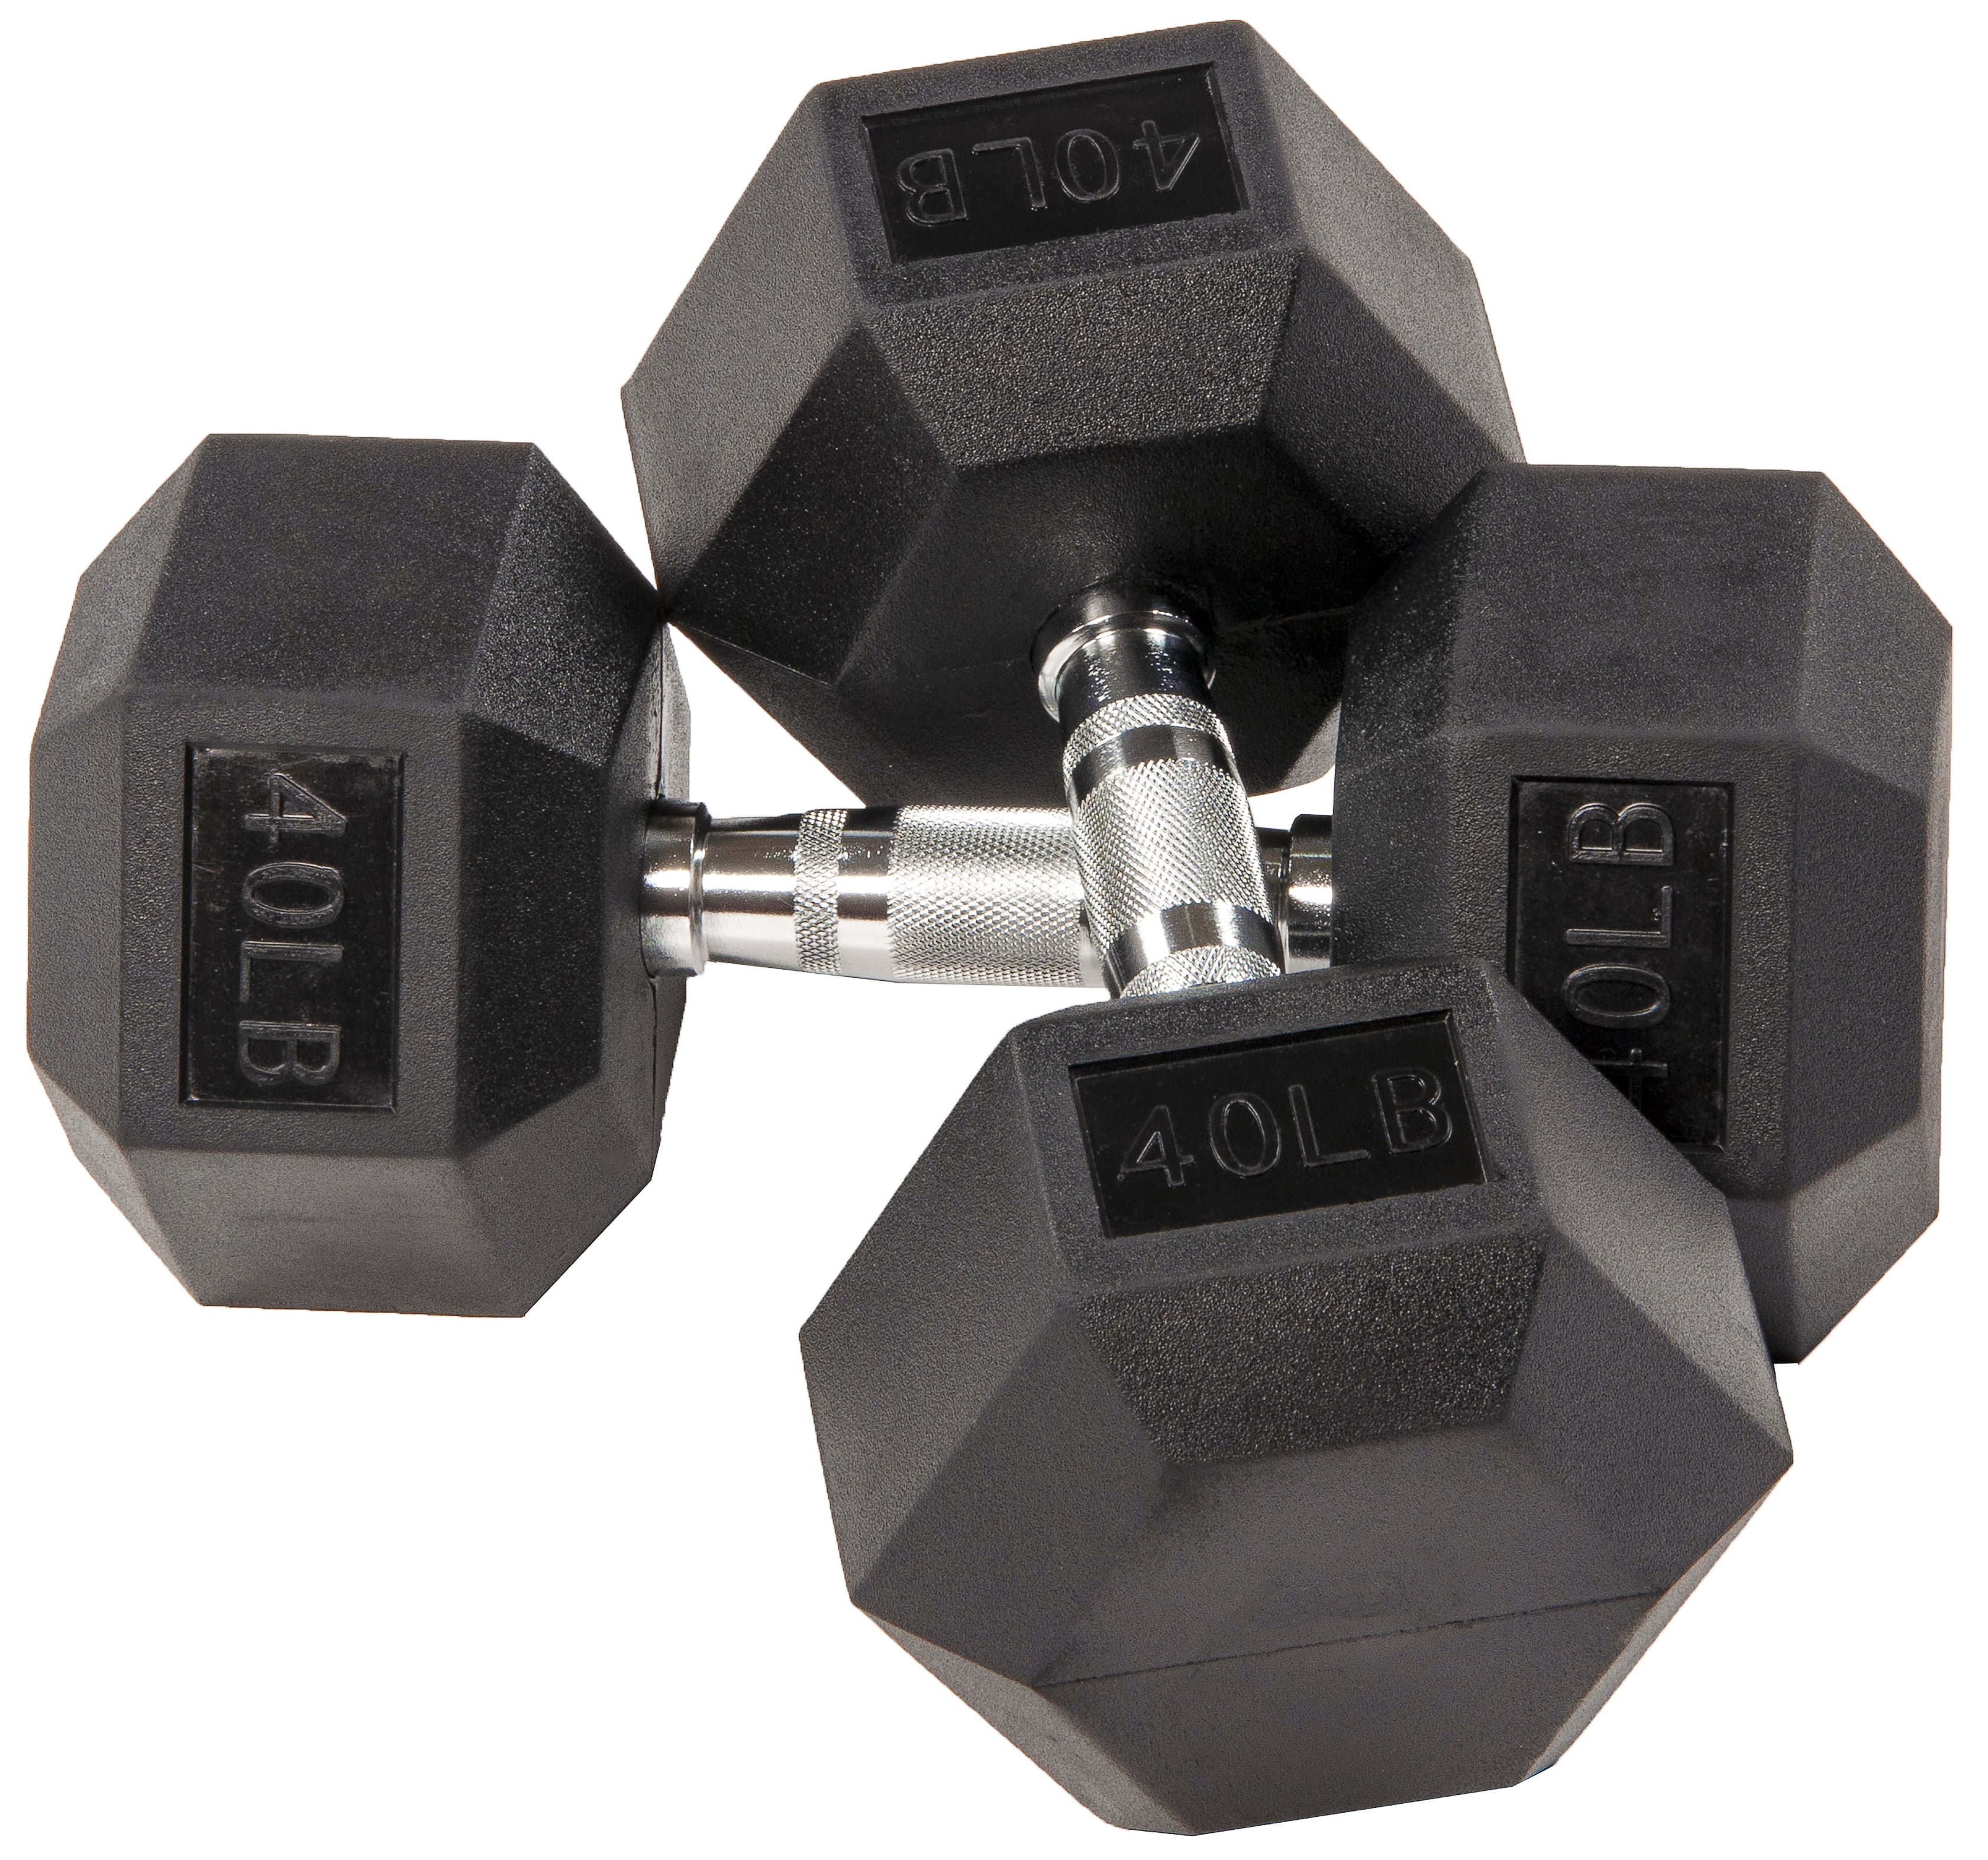 Weider Hex Rubber Coated Dumbbells Set Totals 40 lbs NEW FREE SHIP 20 lb Pair 